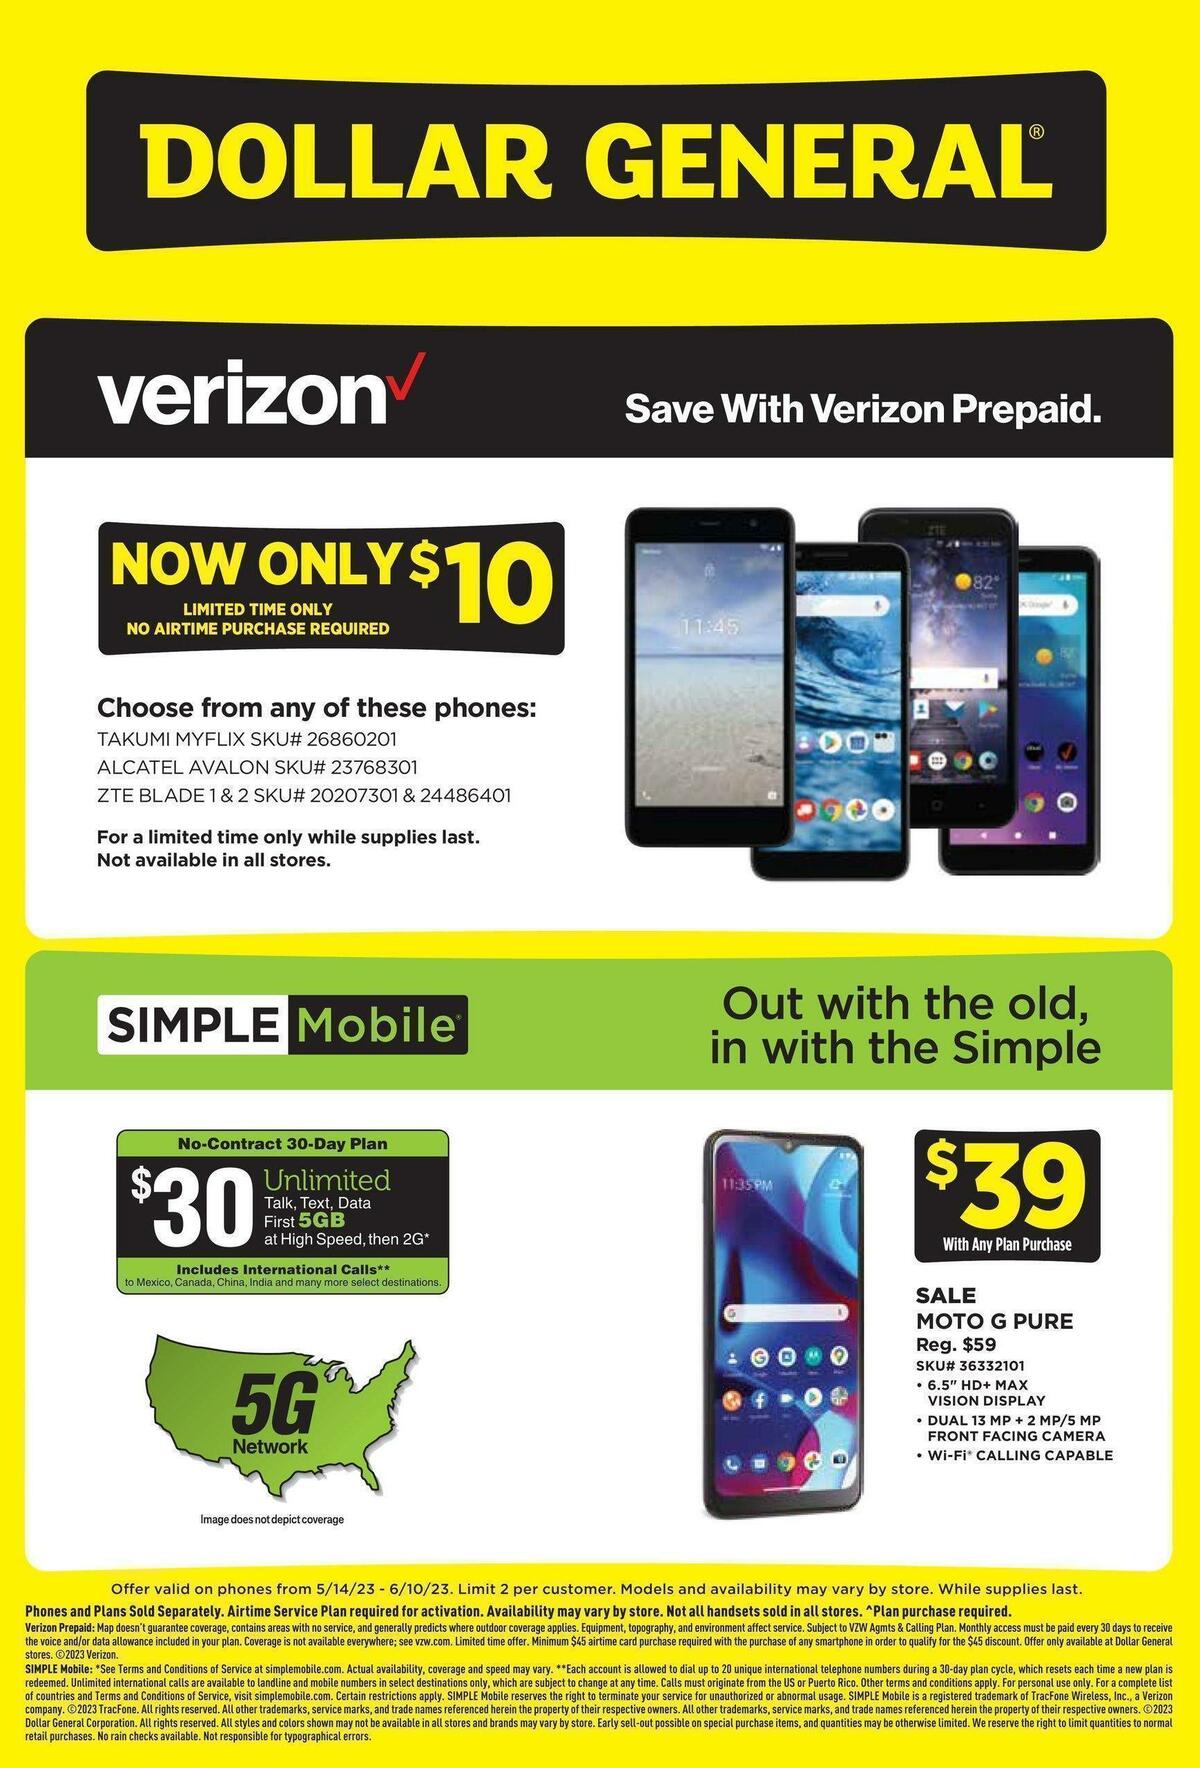 Dollar General Weekly Wireless Specials Weekly Ad from May 14